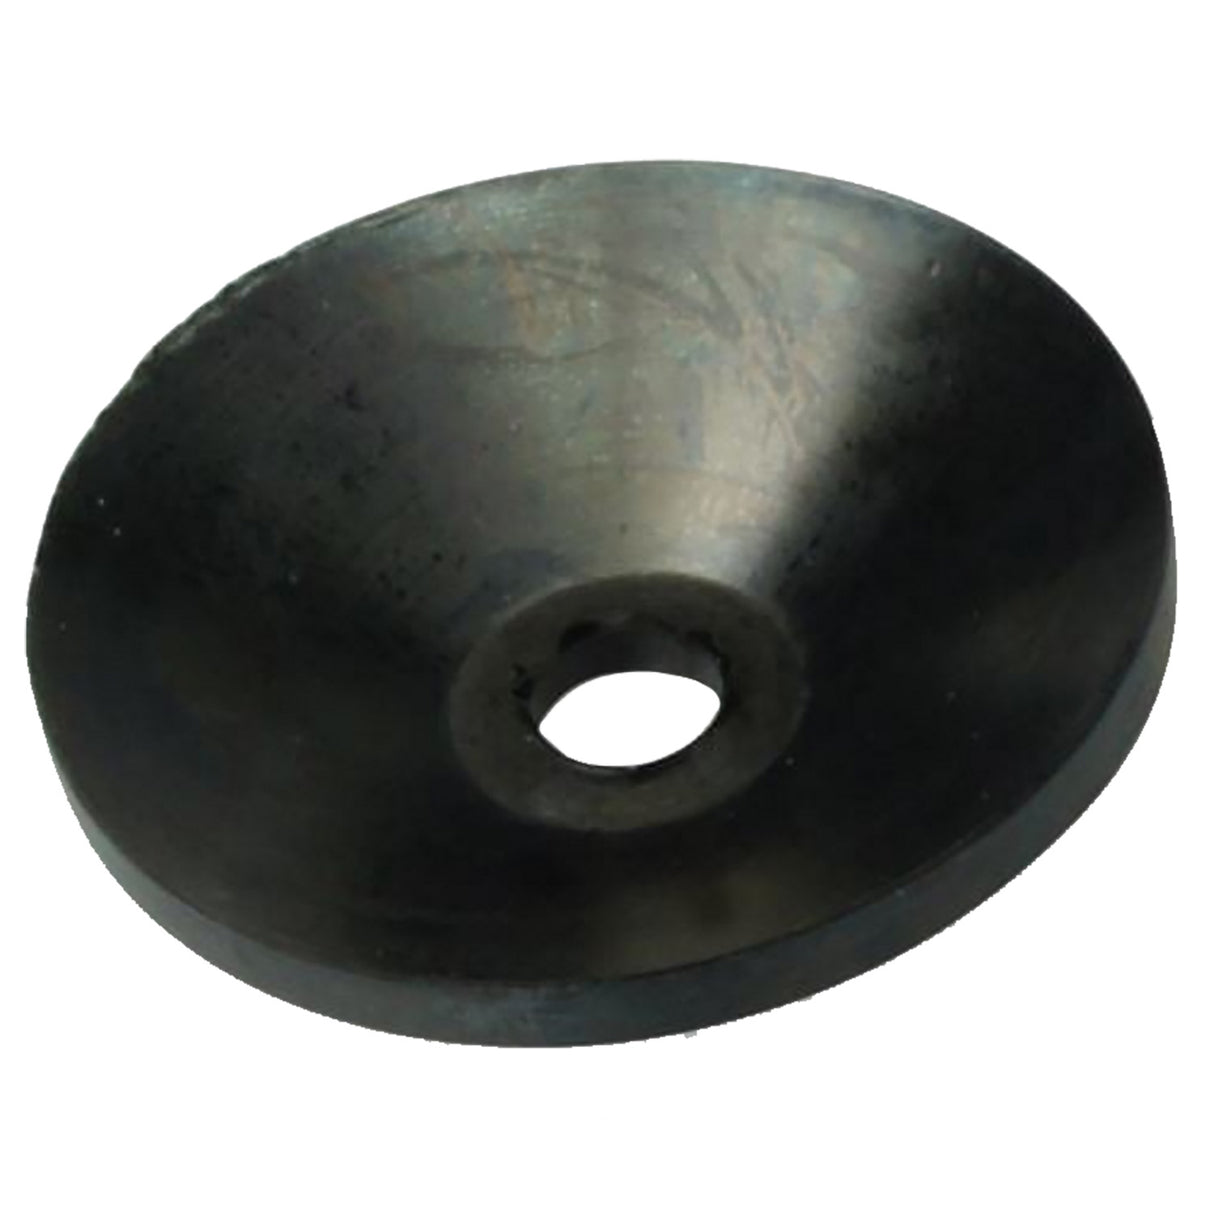 Flush plate cup ring / Jetter cup